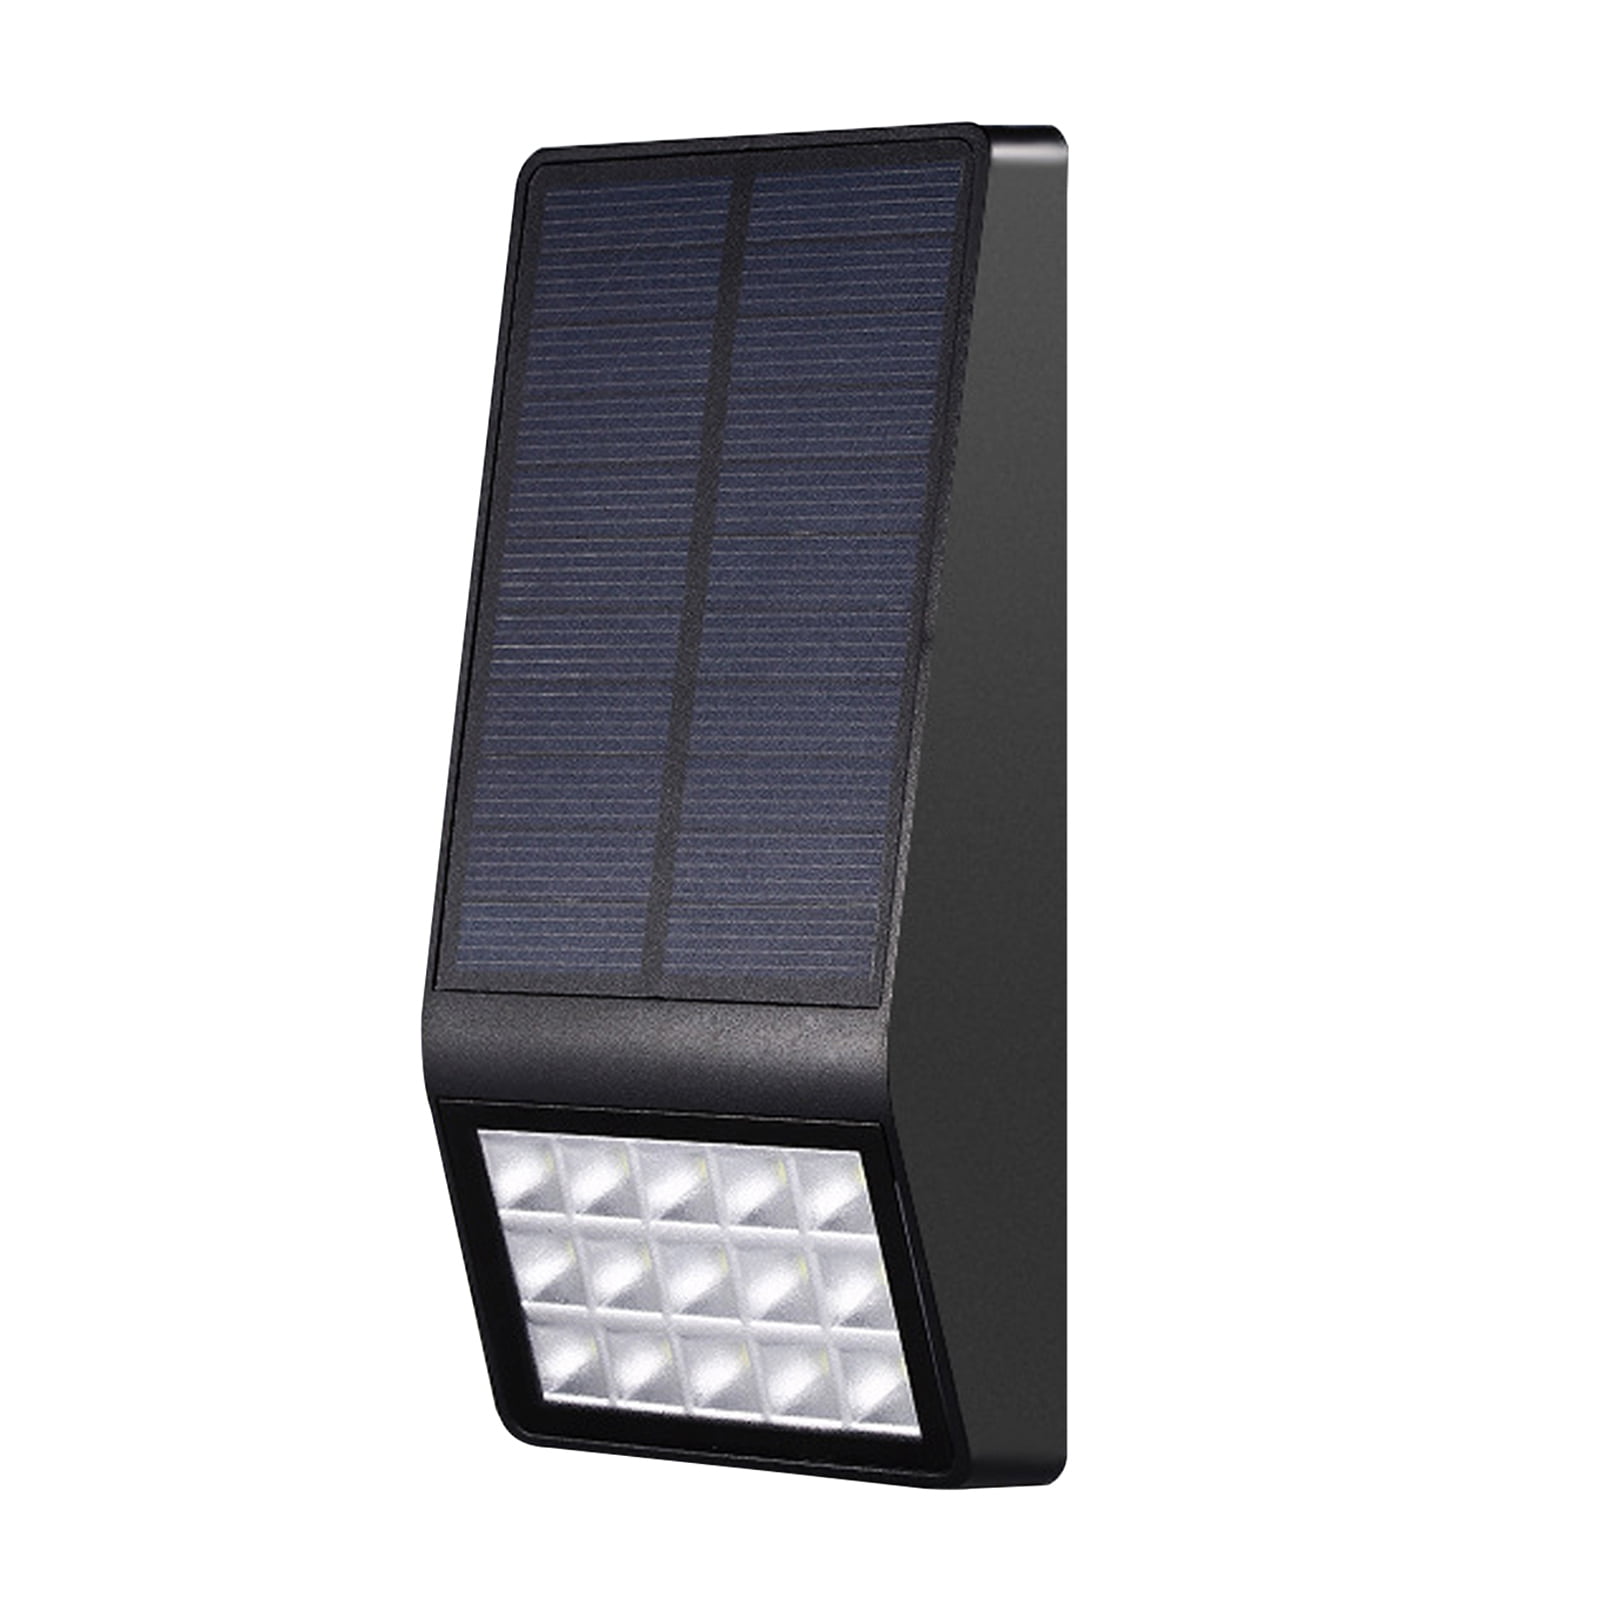 LED Solar Wall Light Outdoor Garden Security Lamp By Microwave Radar Motion 